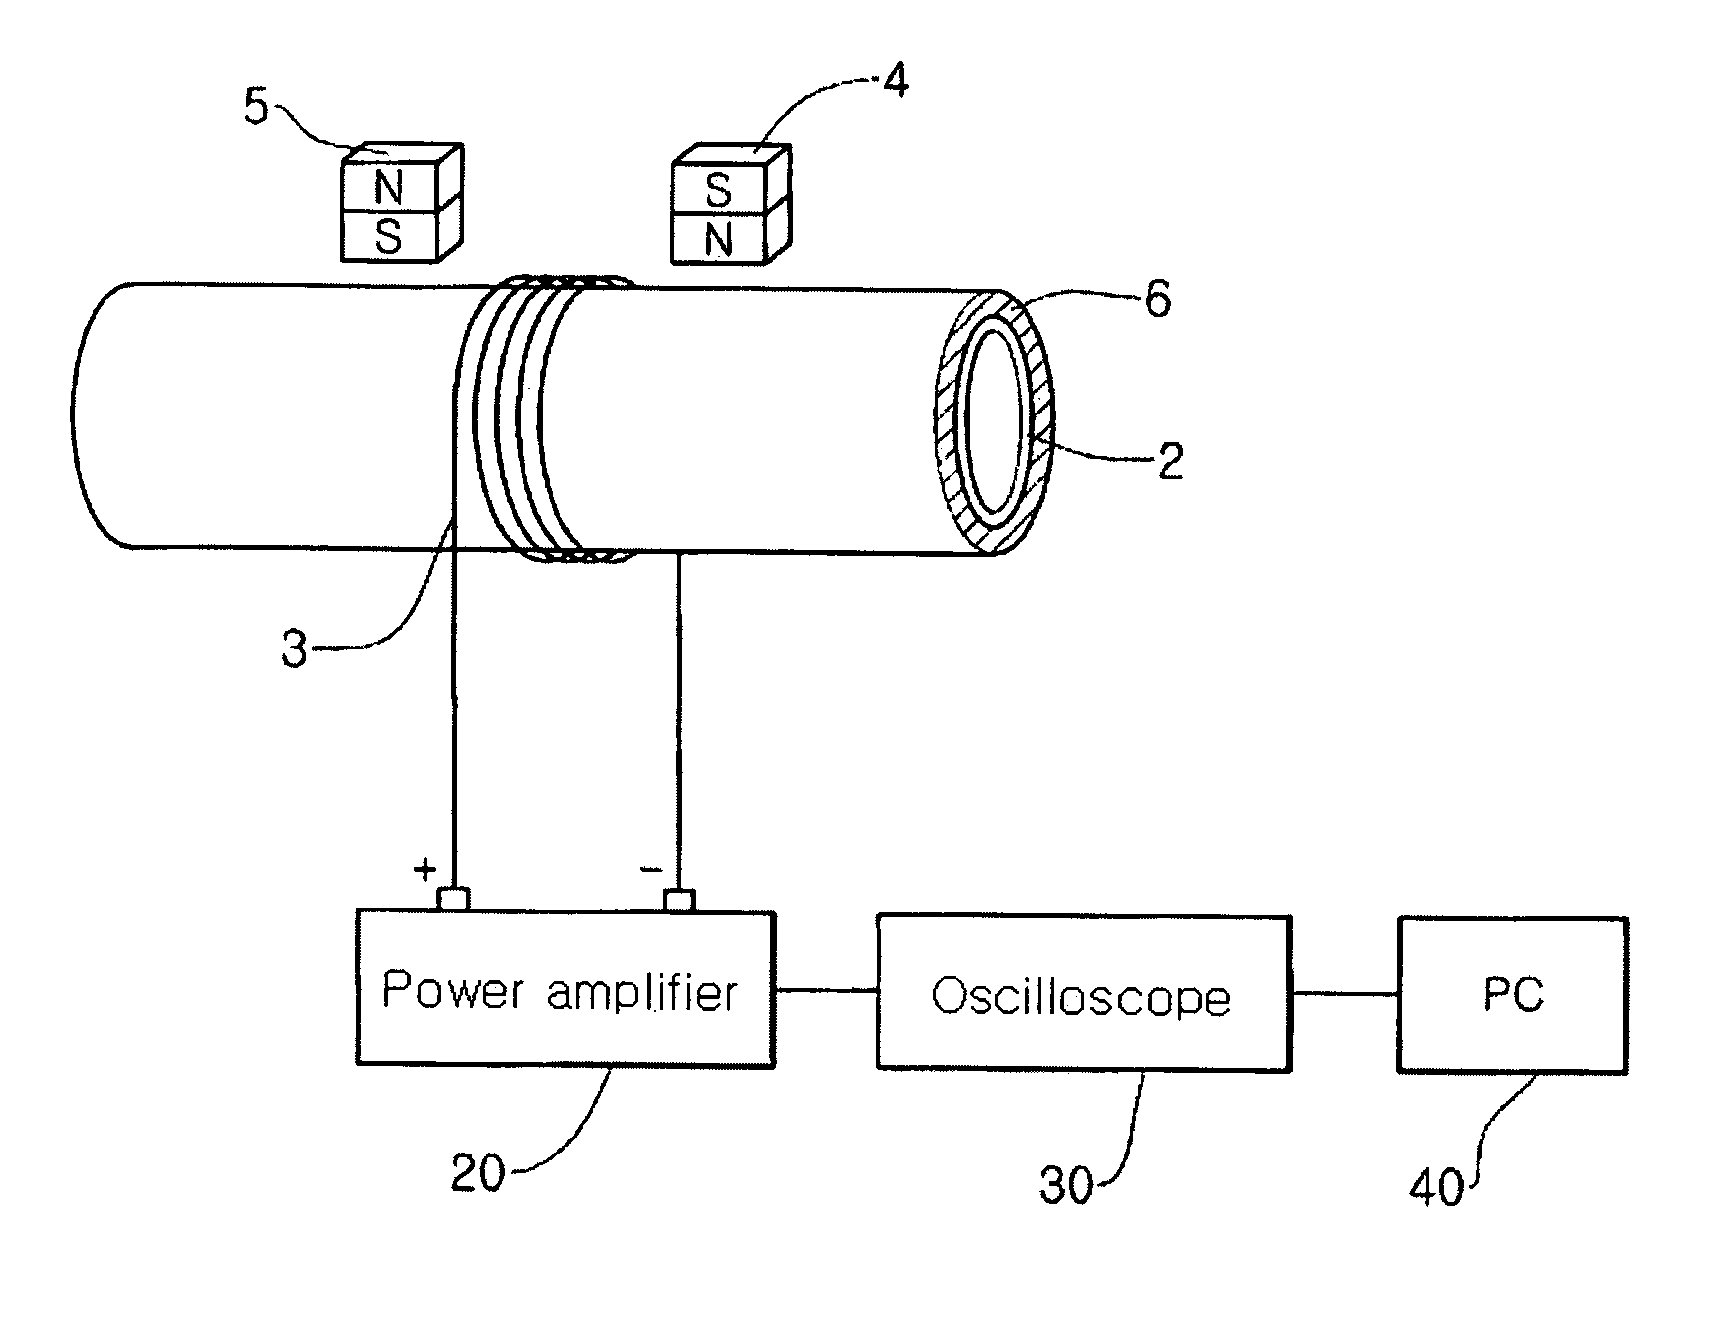 Apparatus for generating and measuring bending vibration in a non-ferromagnetic pipe without physical contact